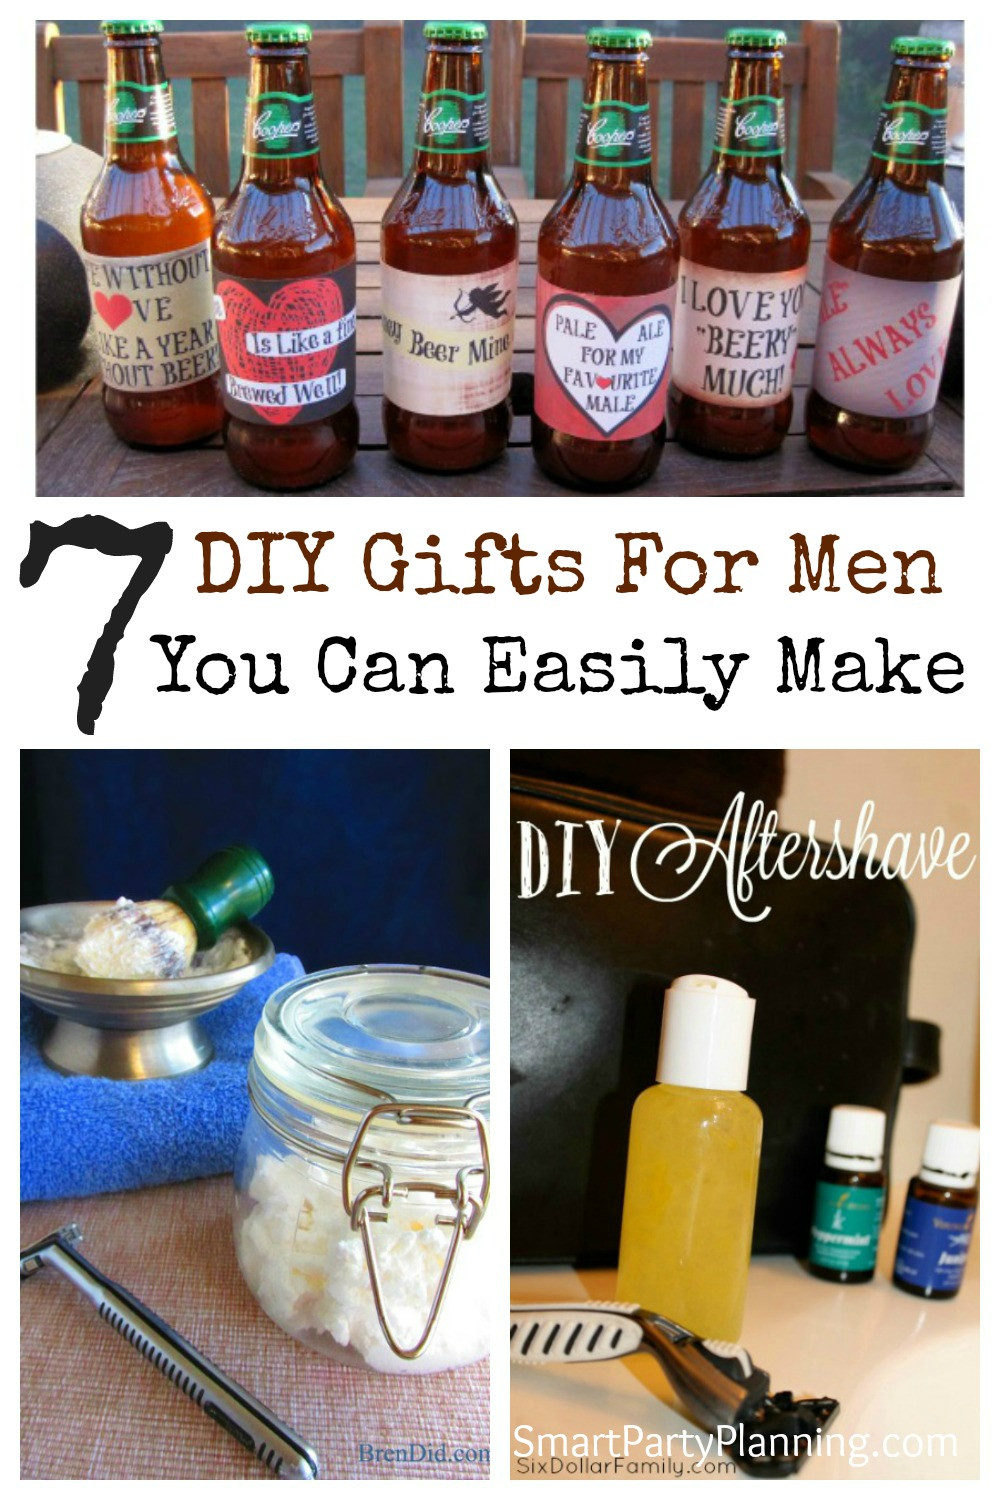 Valentines Gift Ideas For Men
 7 DIY Gifts For Men You Can Easily Make